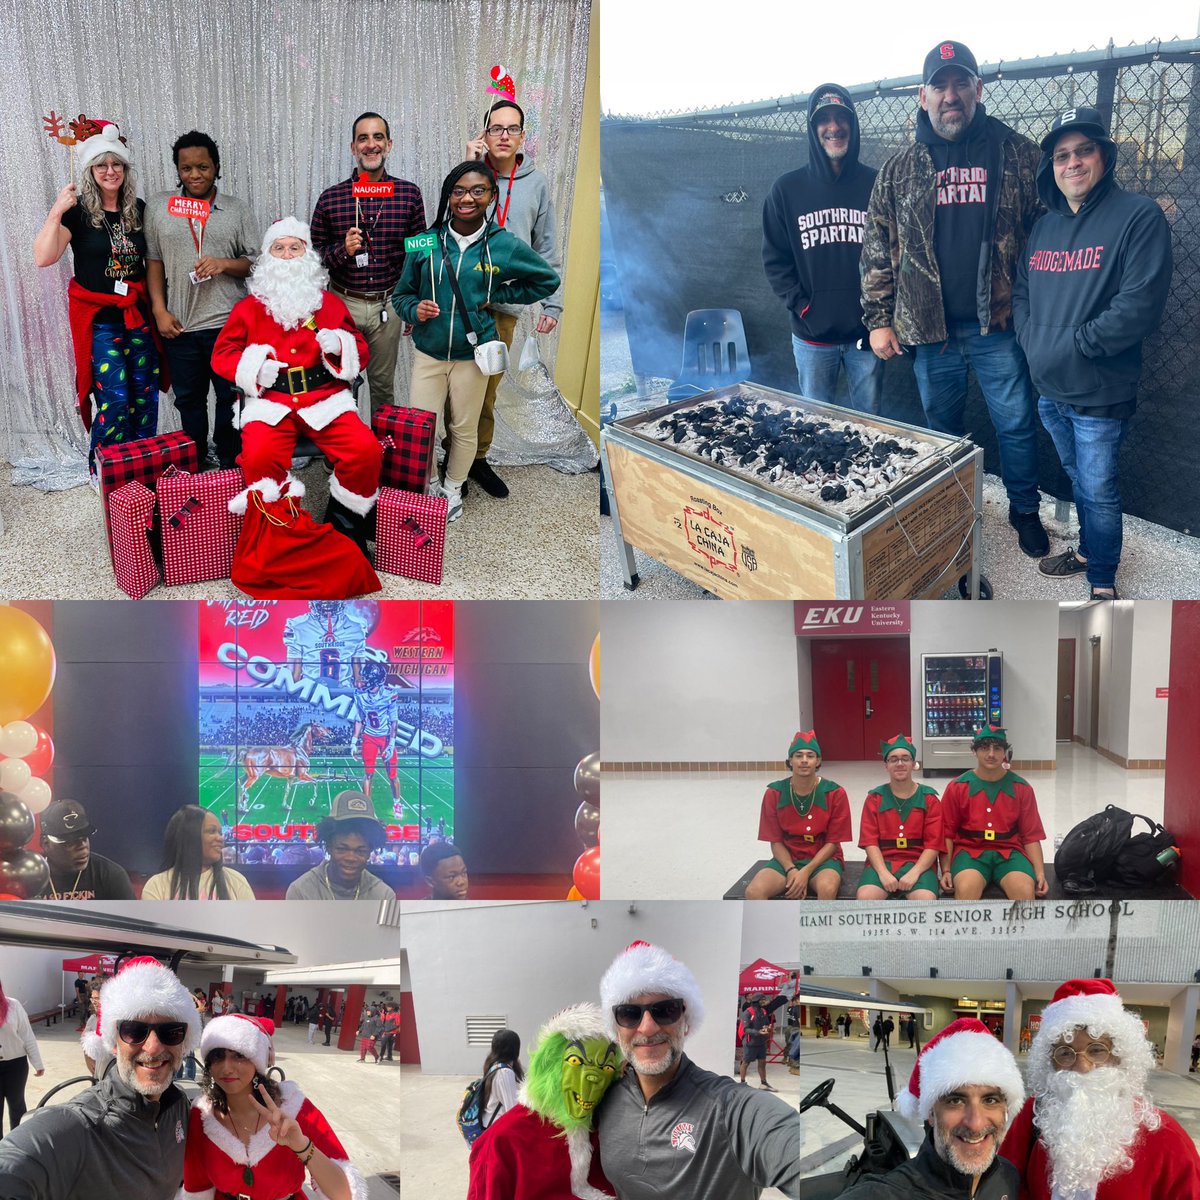 An amazing final week of 2023 @Southridge_SHS filled with blessings & joy. Wishing all of our Spartans a safe & restful Winter Break. See you in 2024!